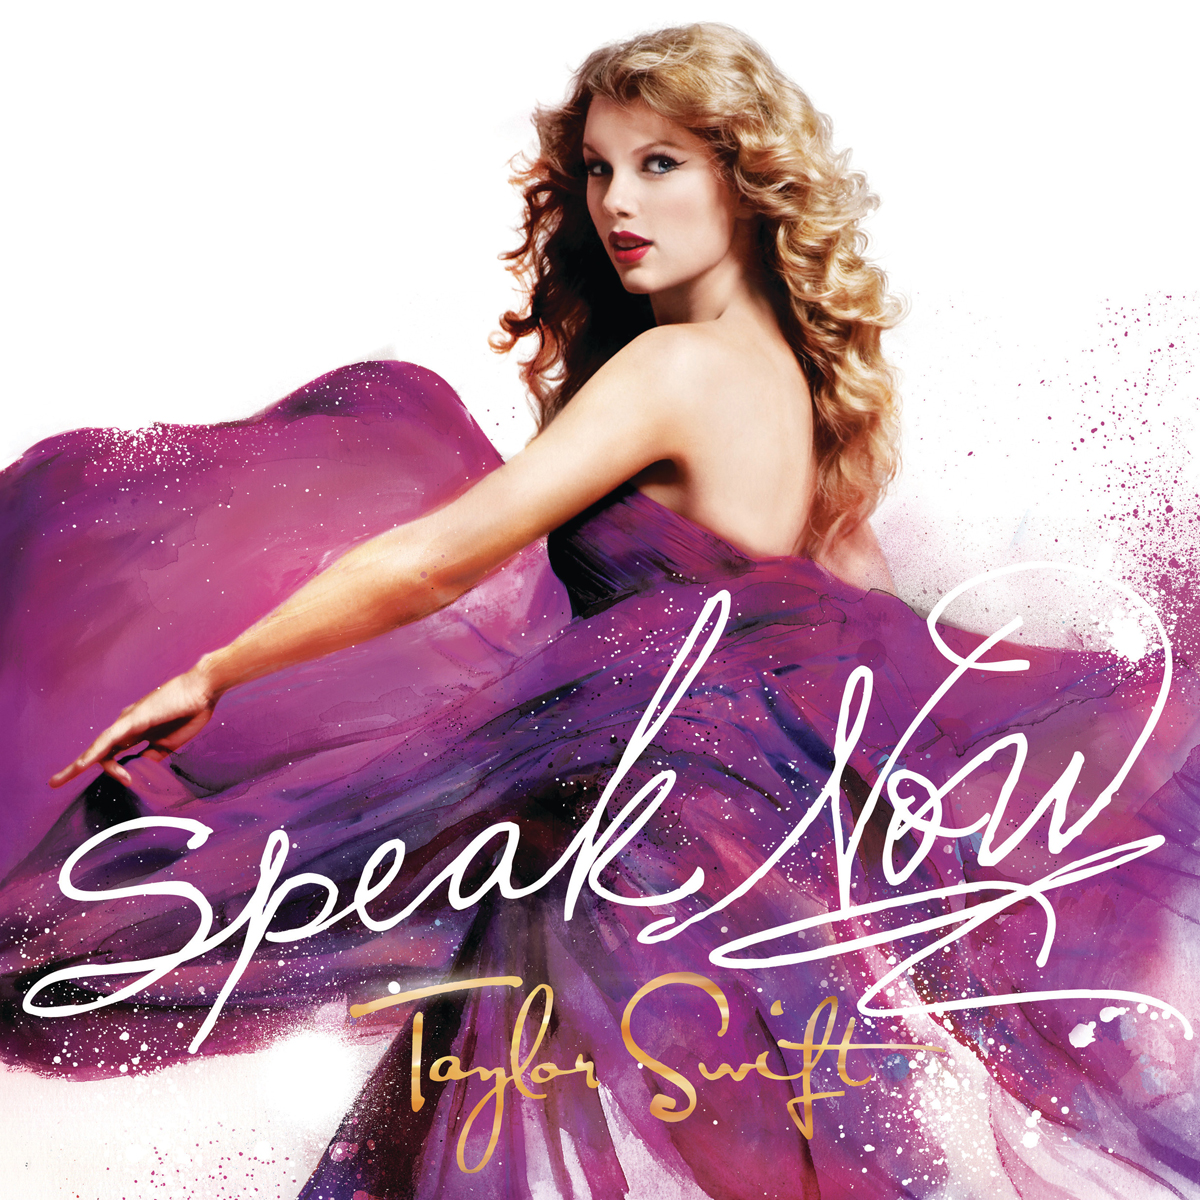 Tell Me Why polaroid poster  Taylor swift lyrics, Taylor swift songs,  Taylor swift album